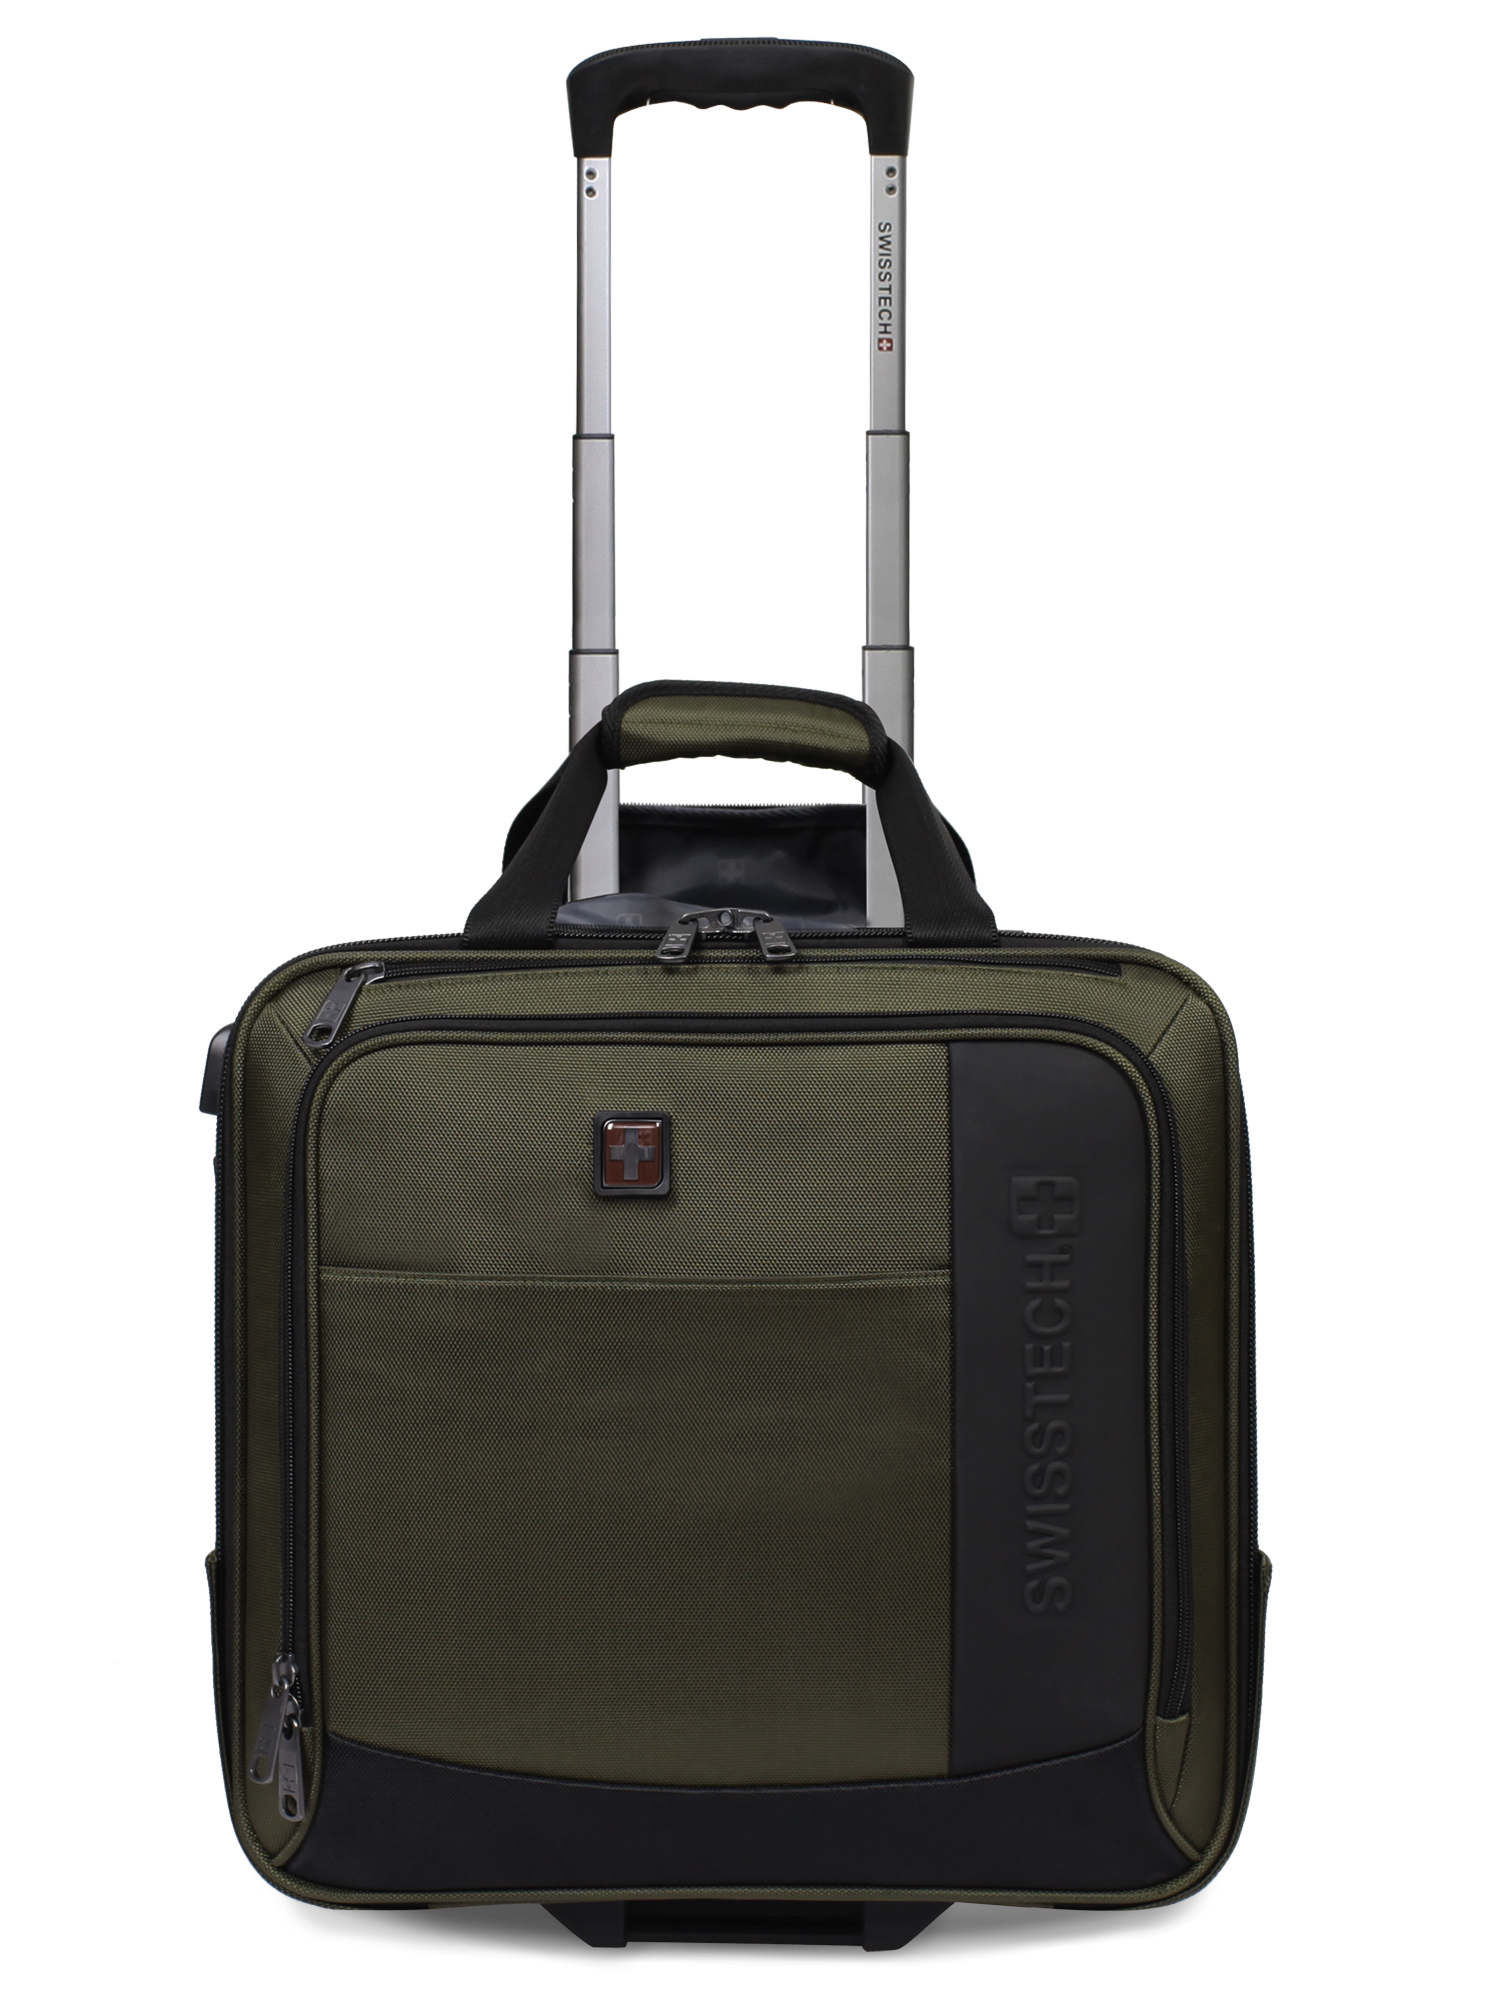 SwissTech Urban Trek 16.5" Under-seater Carry On Luggage, Olive (Walmart Exclusive) - image 2 of 12